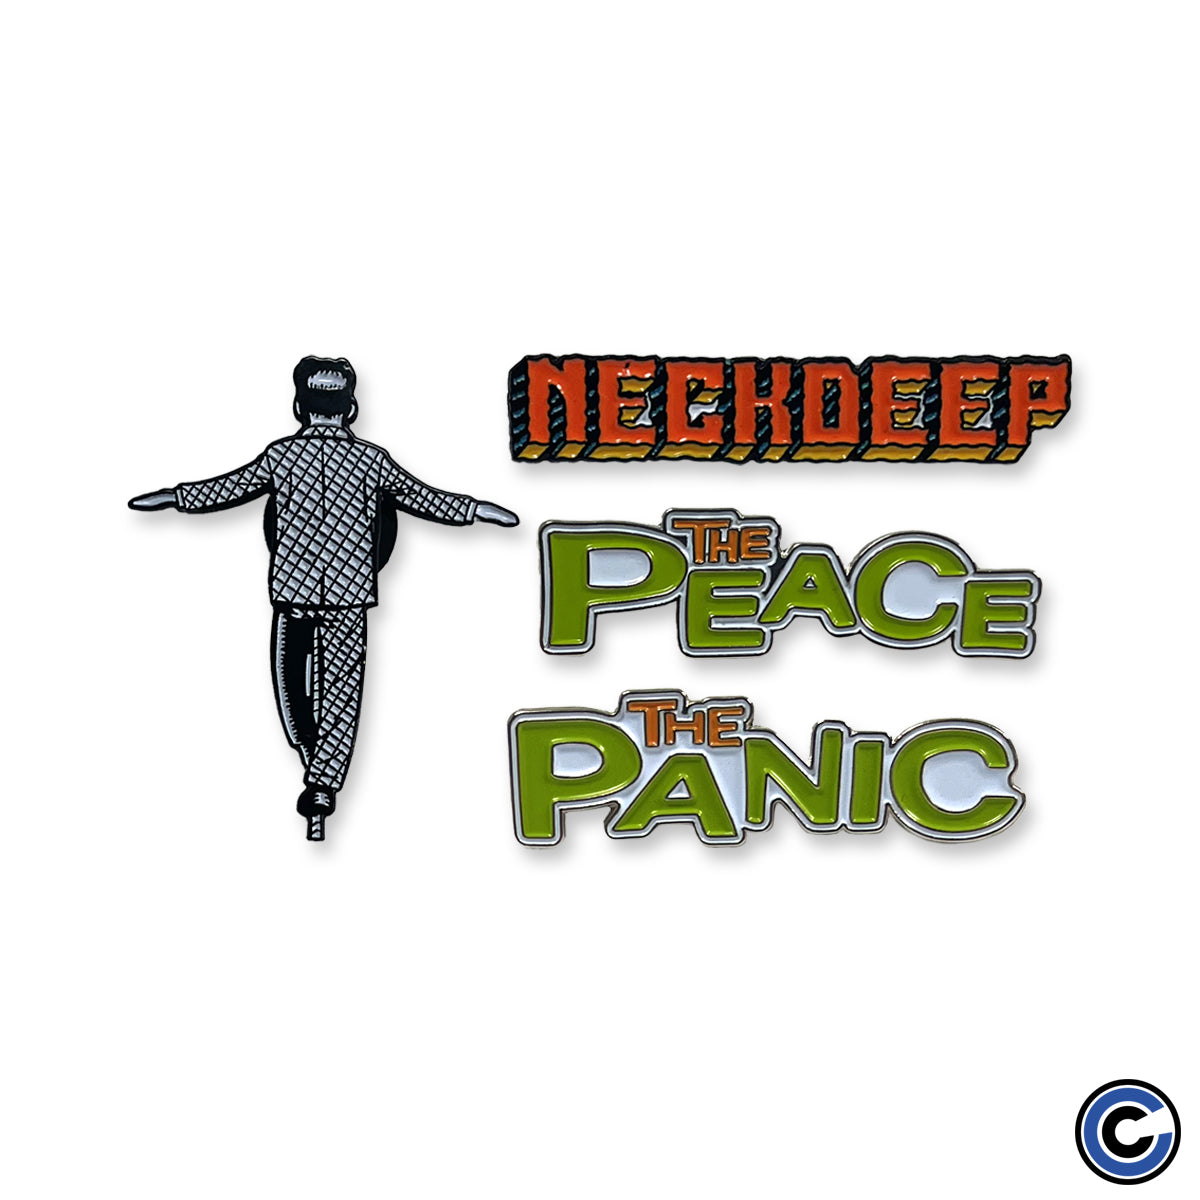 Neck Deep "The Peace and The Panic" Enamel Pin Set